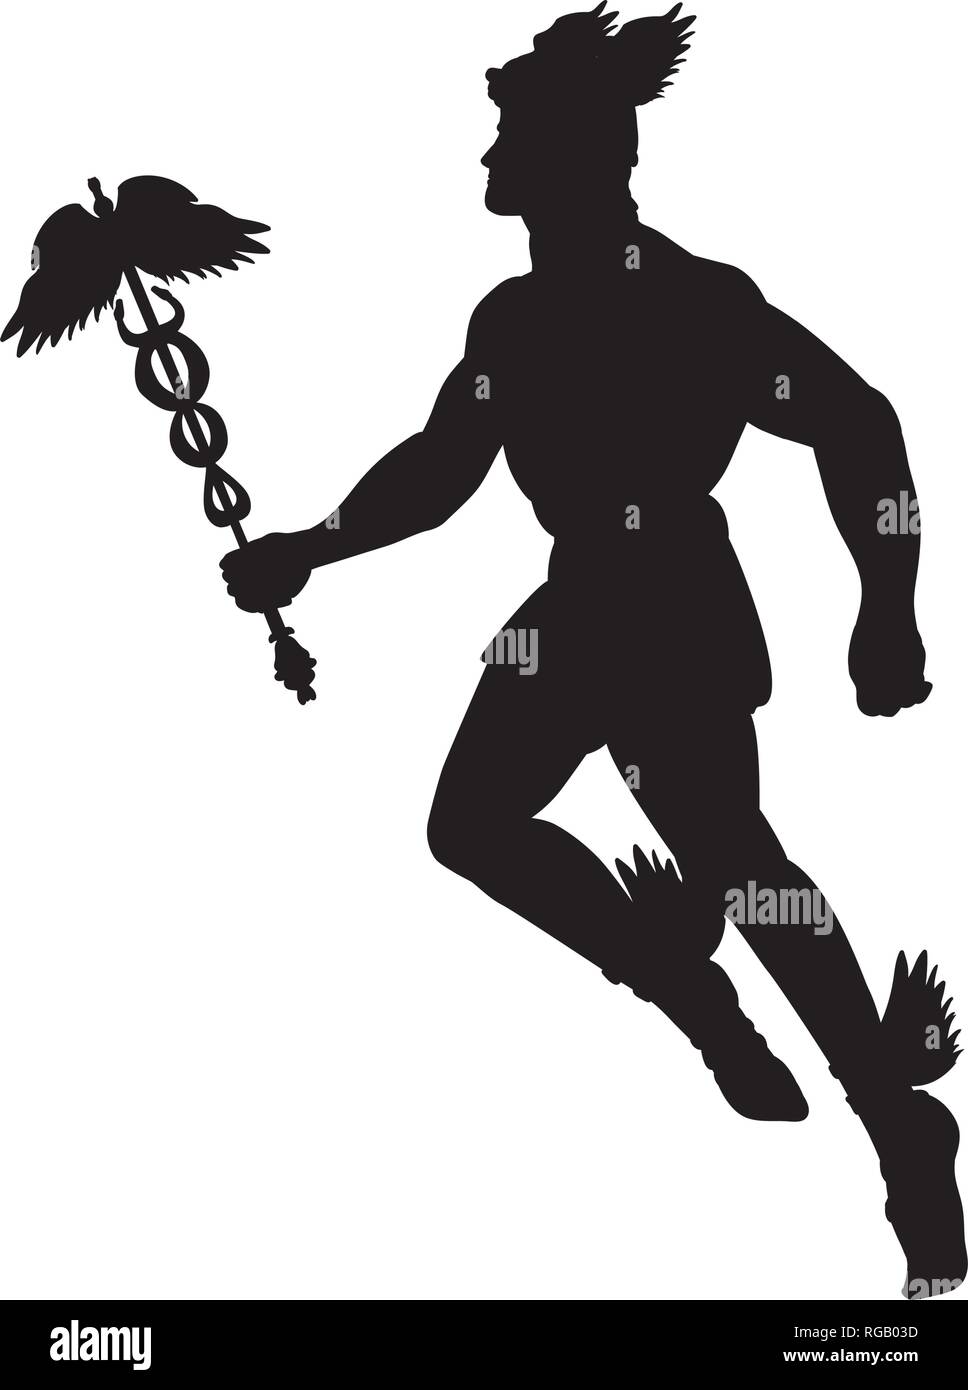 Hermes Greek God High Resolution Stock Photography And Images Alamy